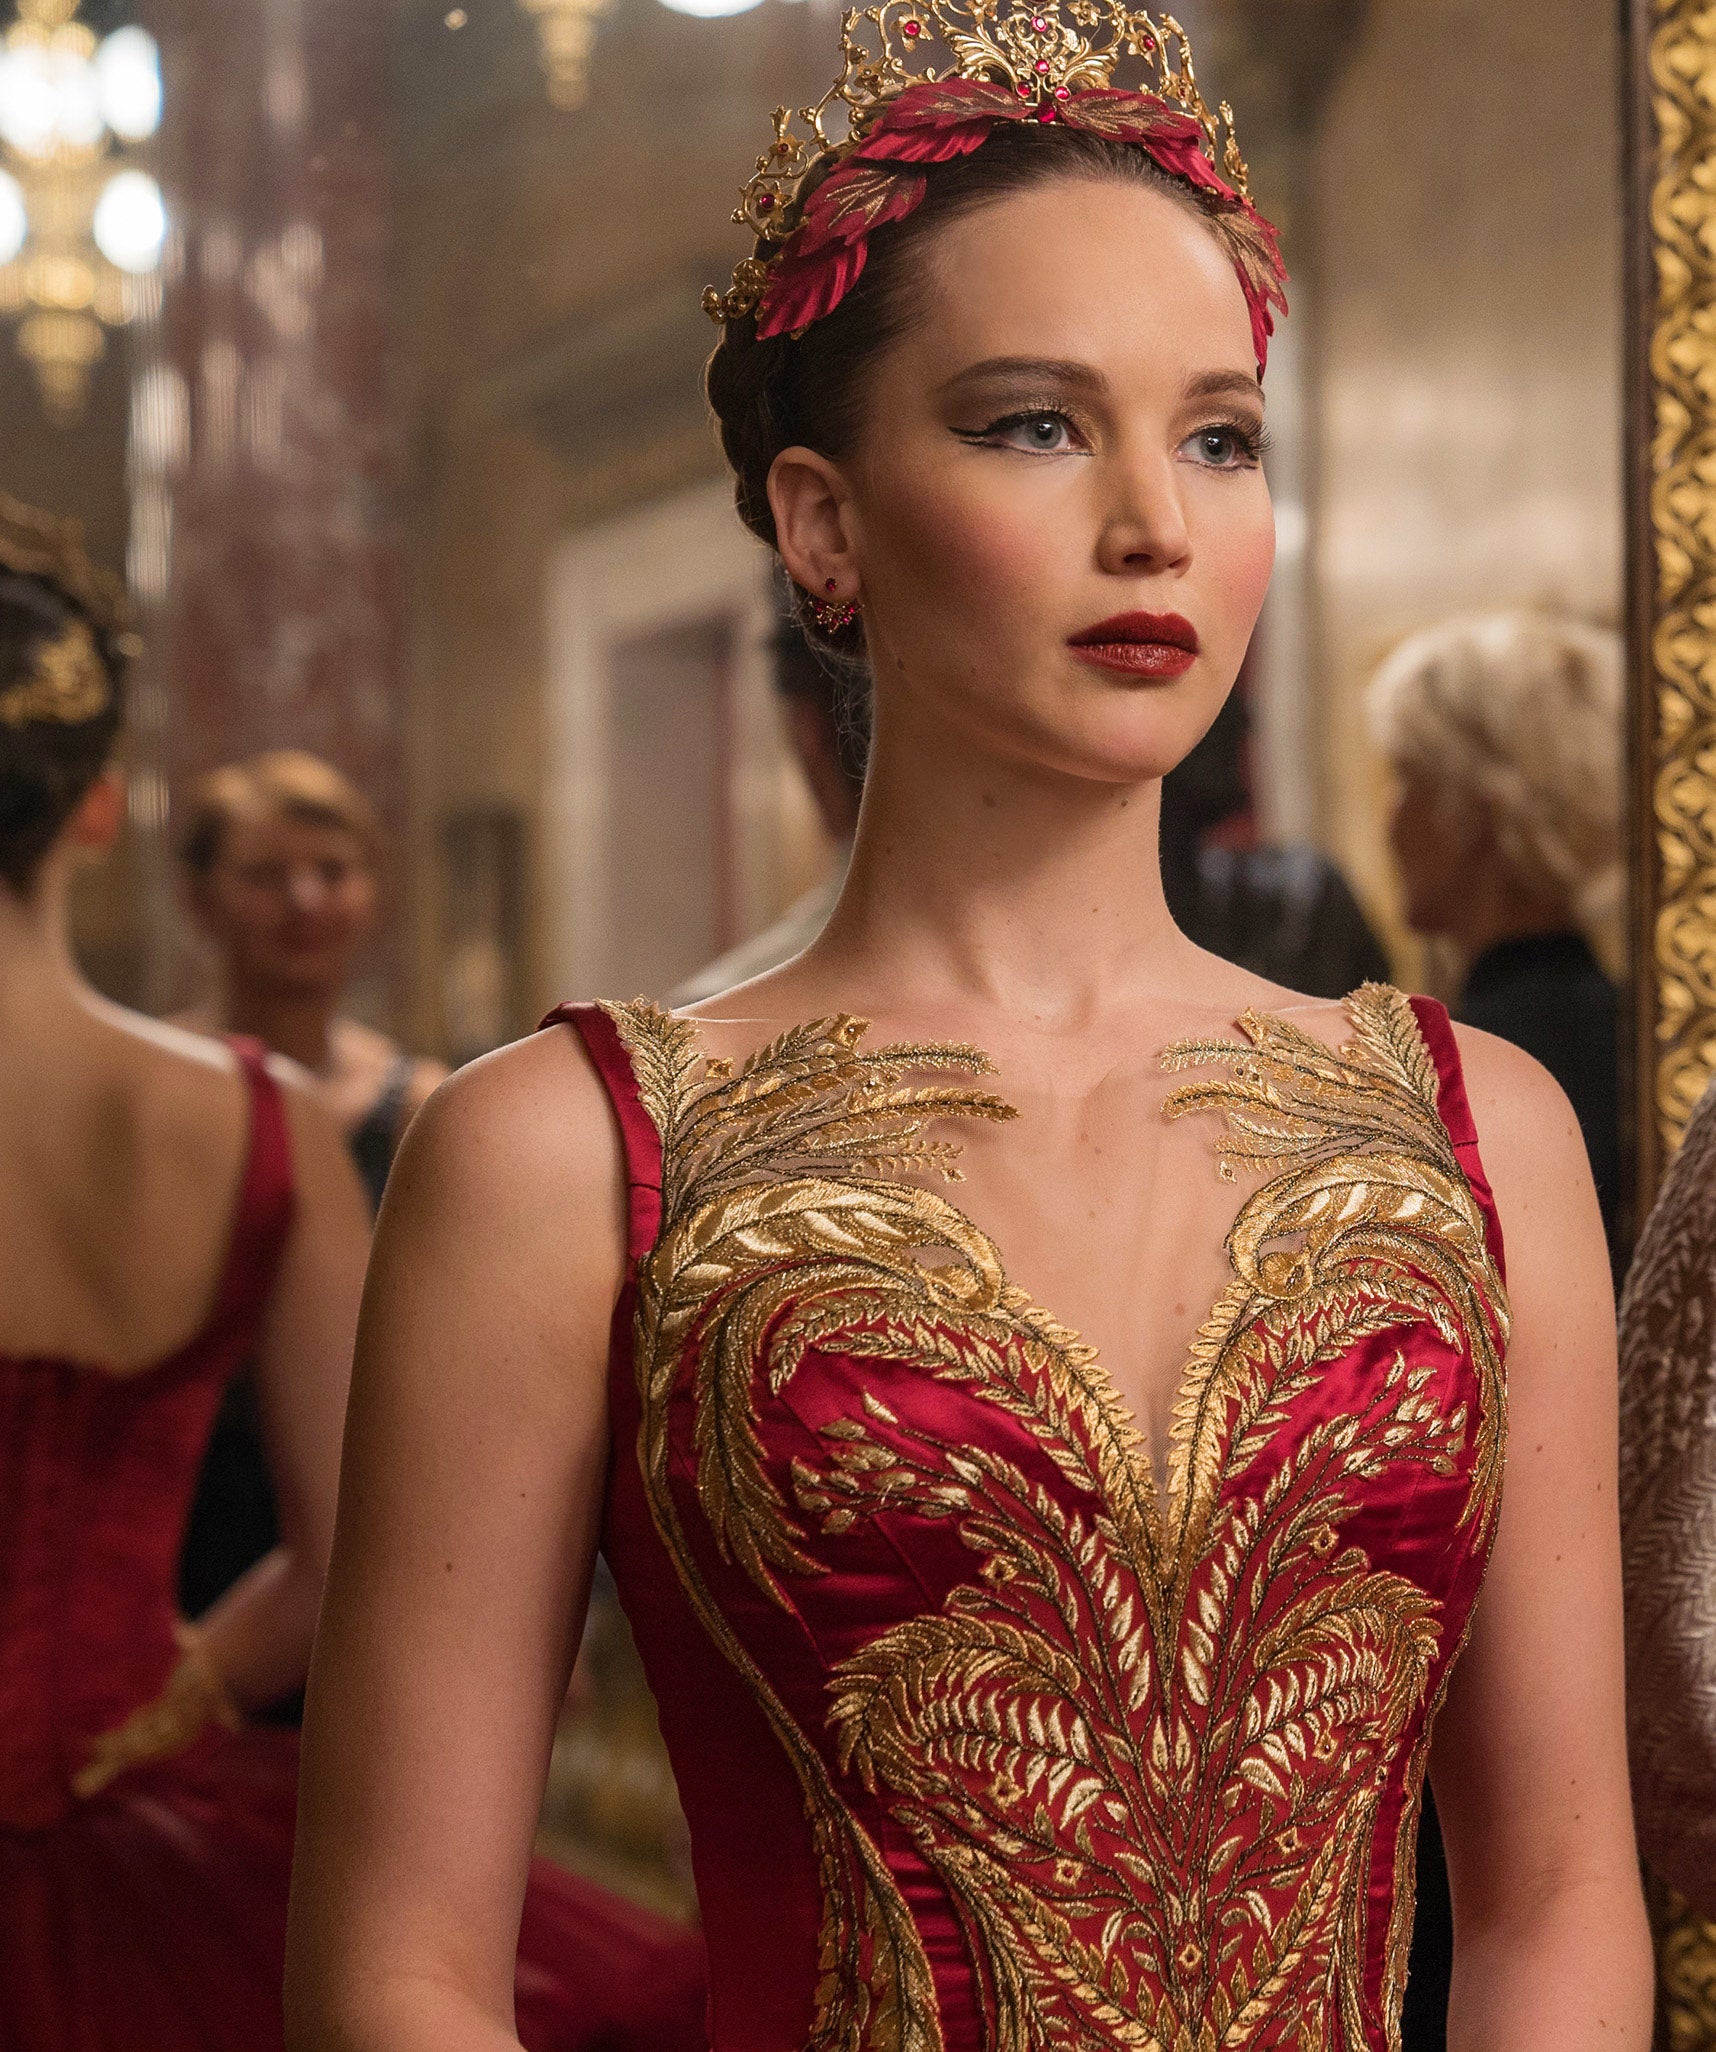 in a scene, Jennifer in an elaborate embroidered ballerina outfit and tiara